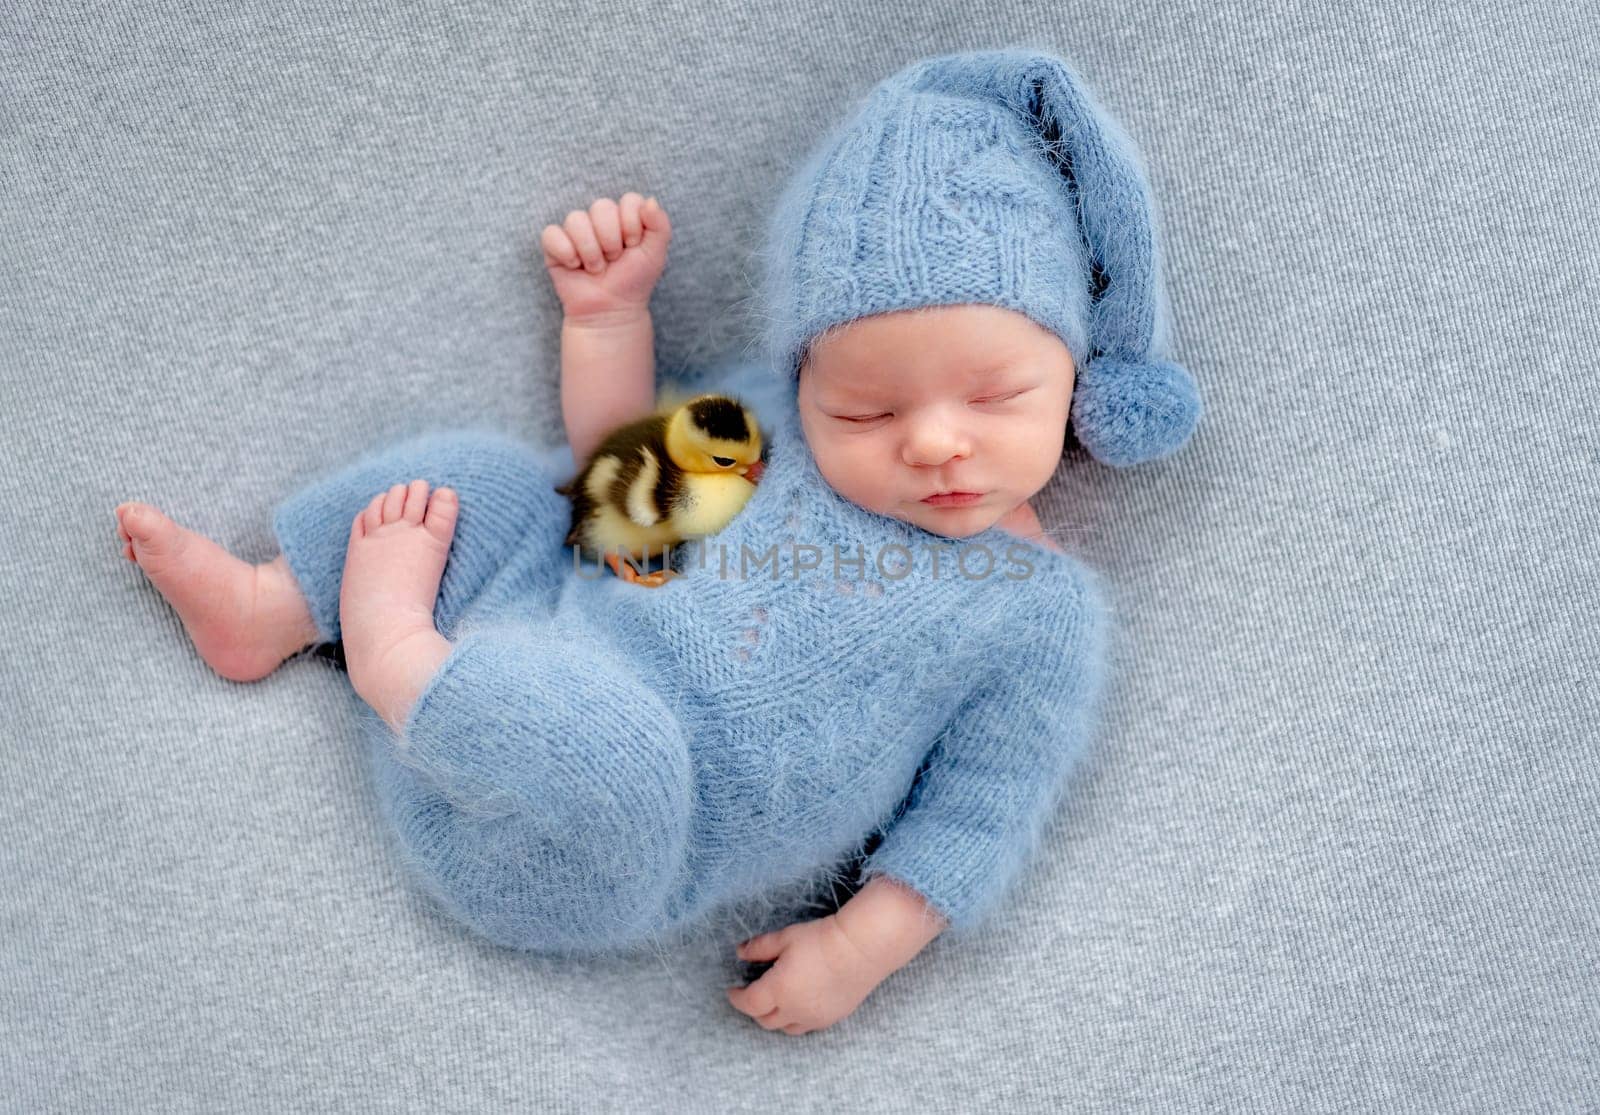 Newborn baby boy sleeping with a duckling chick. Adorable infant child kid sleeping wearing knitted hat and costume